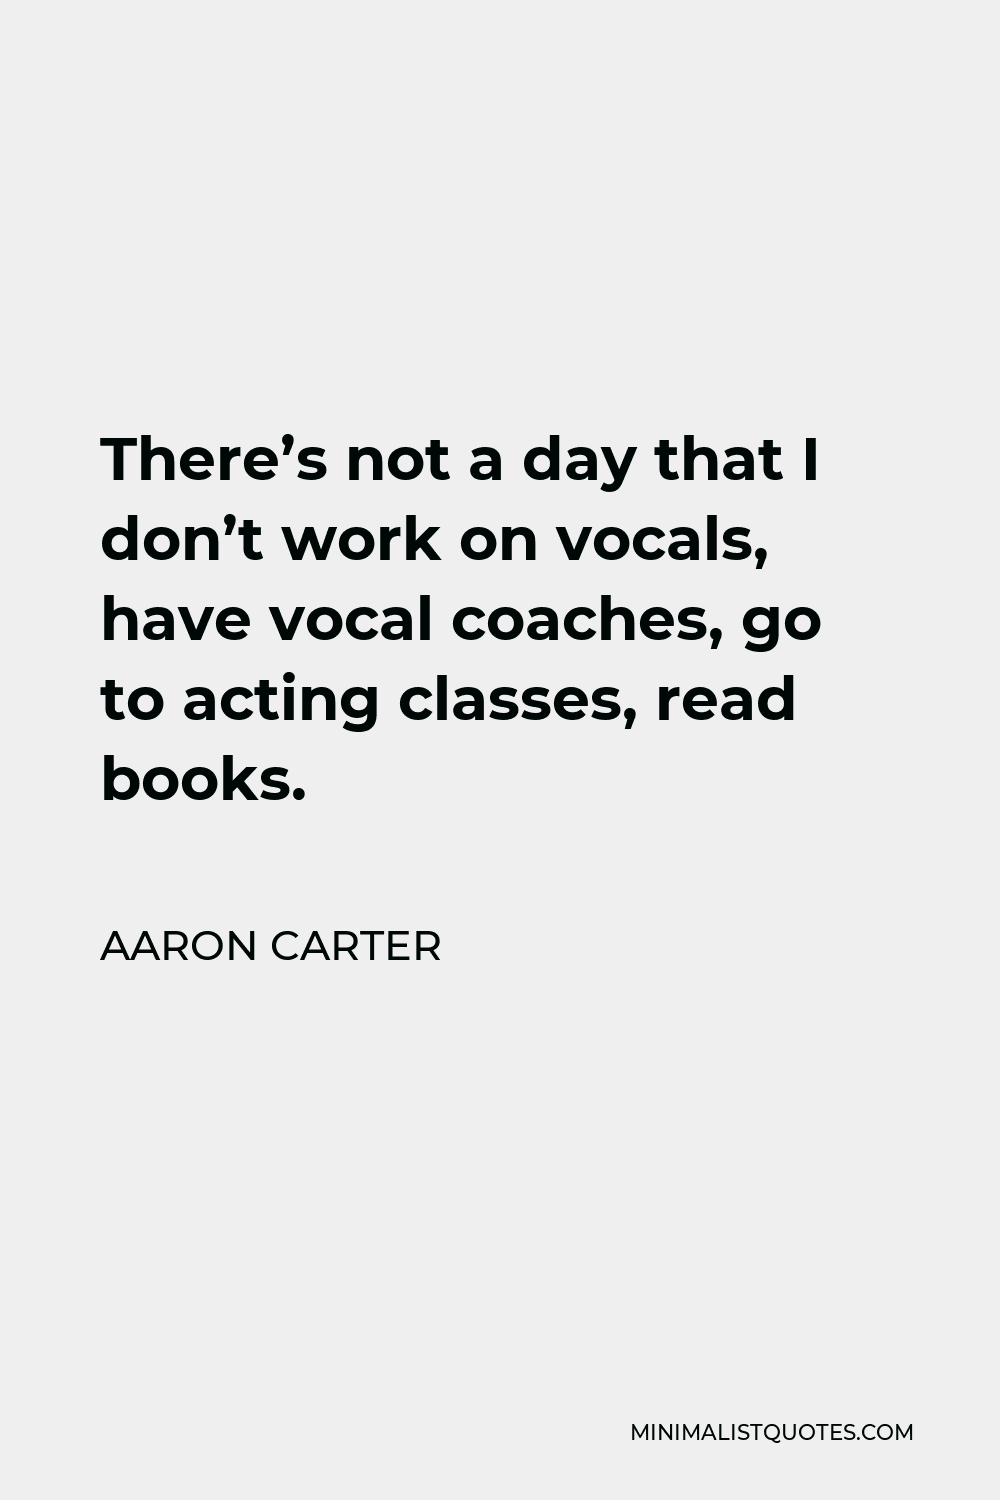 Aaron Carter Quote - There’s not a day that I don’t work on vocals, have vocal coaches, go to acting classes, read books.